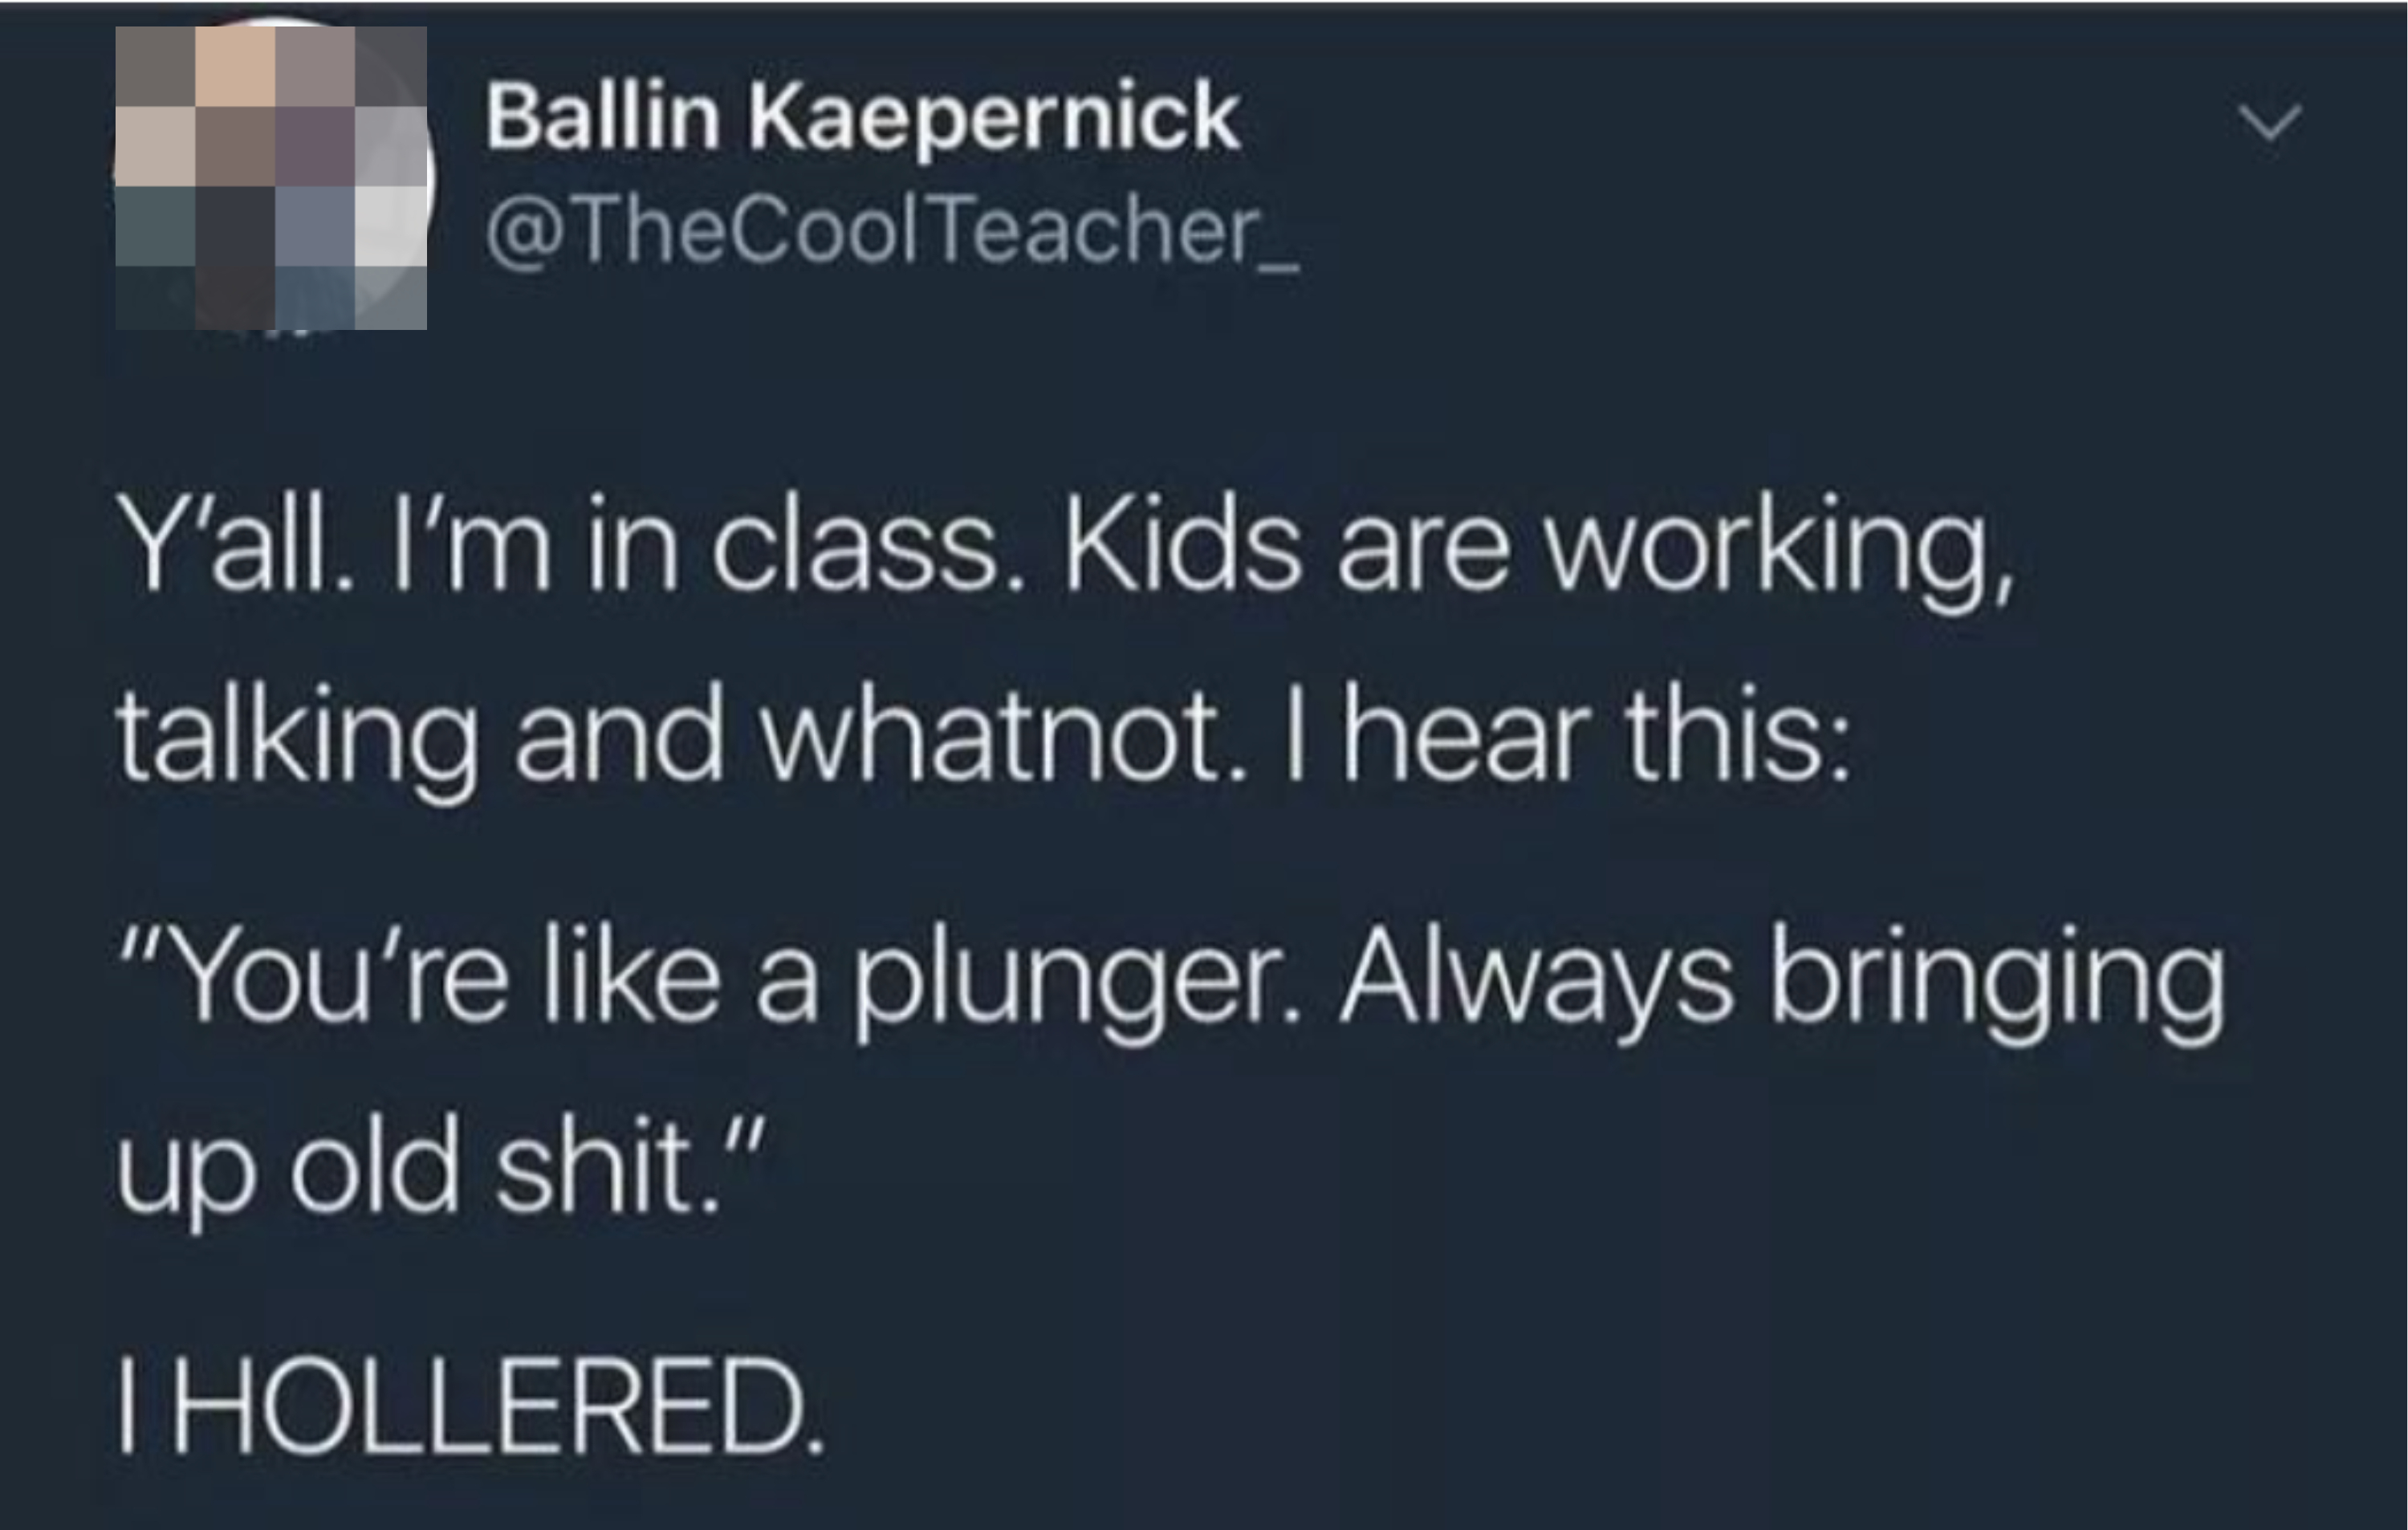 &quot;You&#x27;re like a plunger. Always bringing up old shit.&quot;